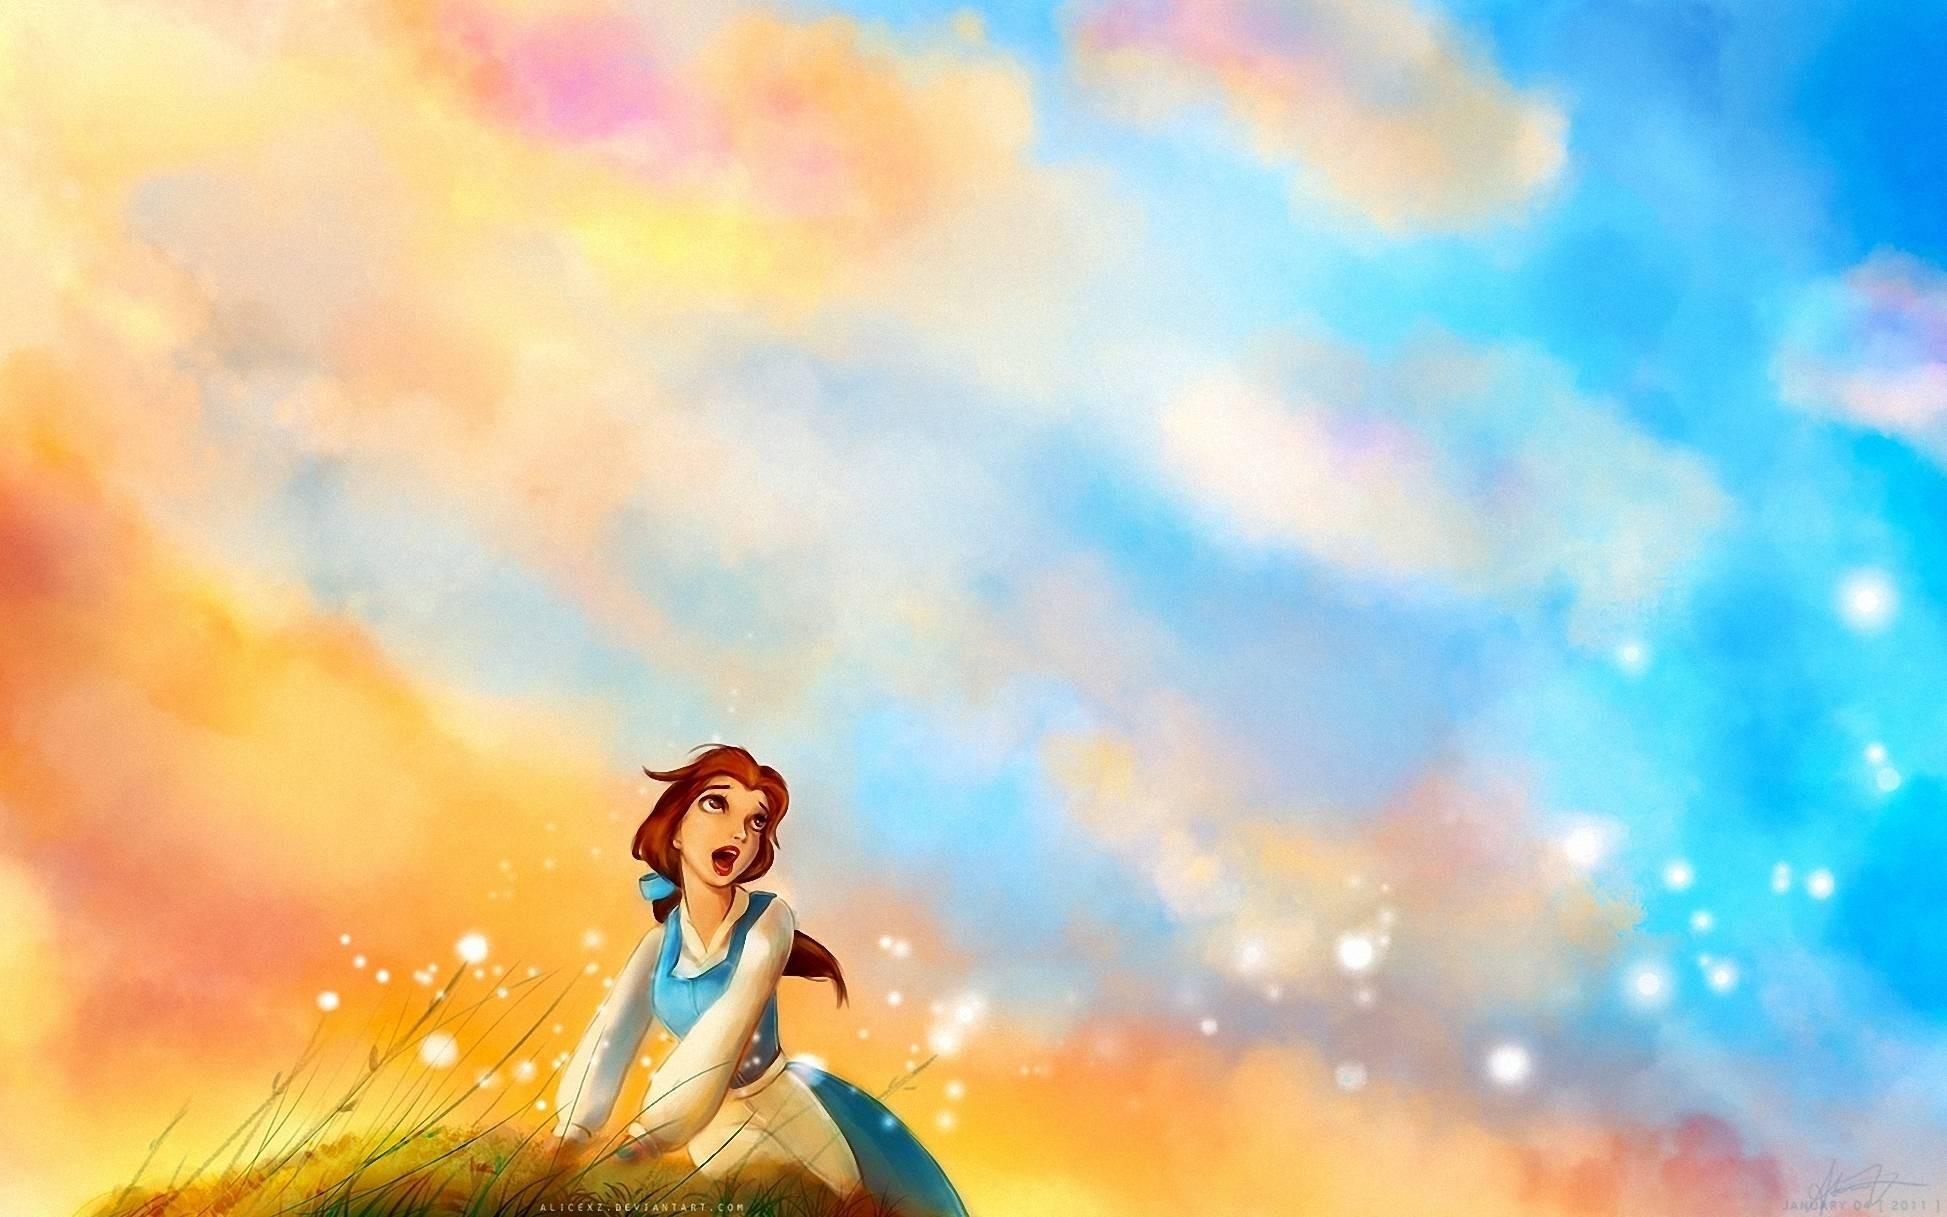 Beauty and the Beast backgroundDownload free stunning full HD